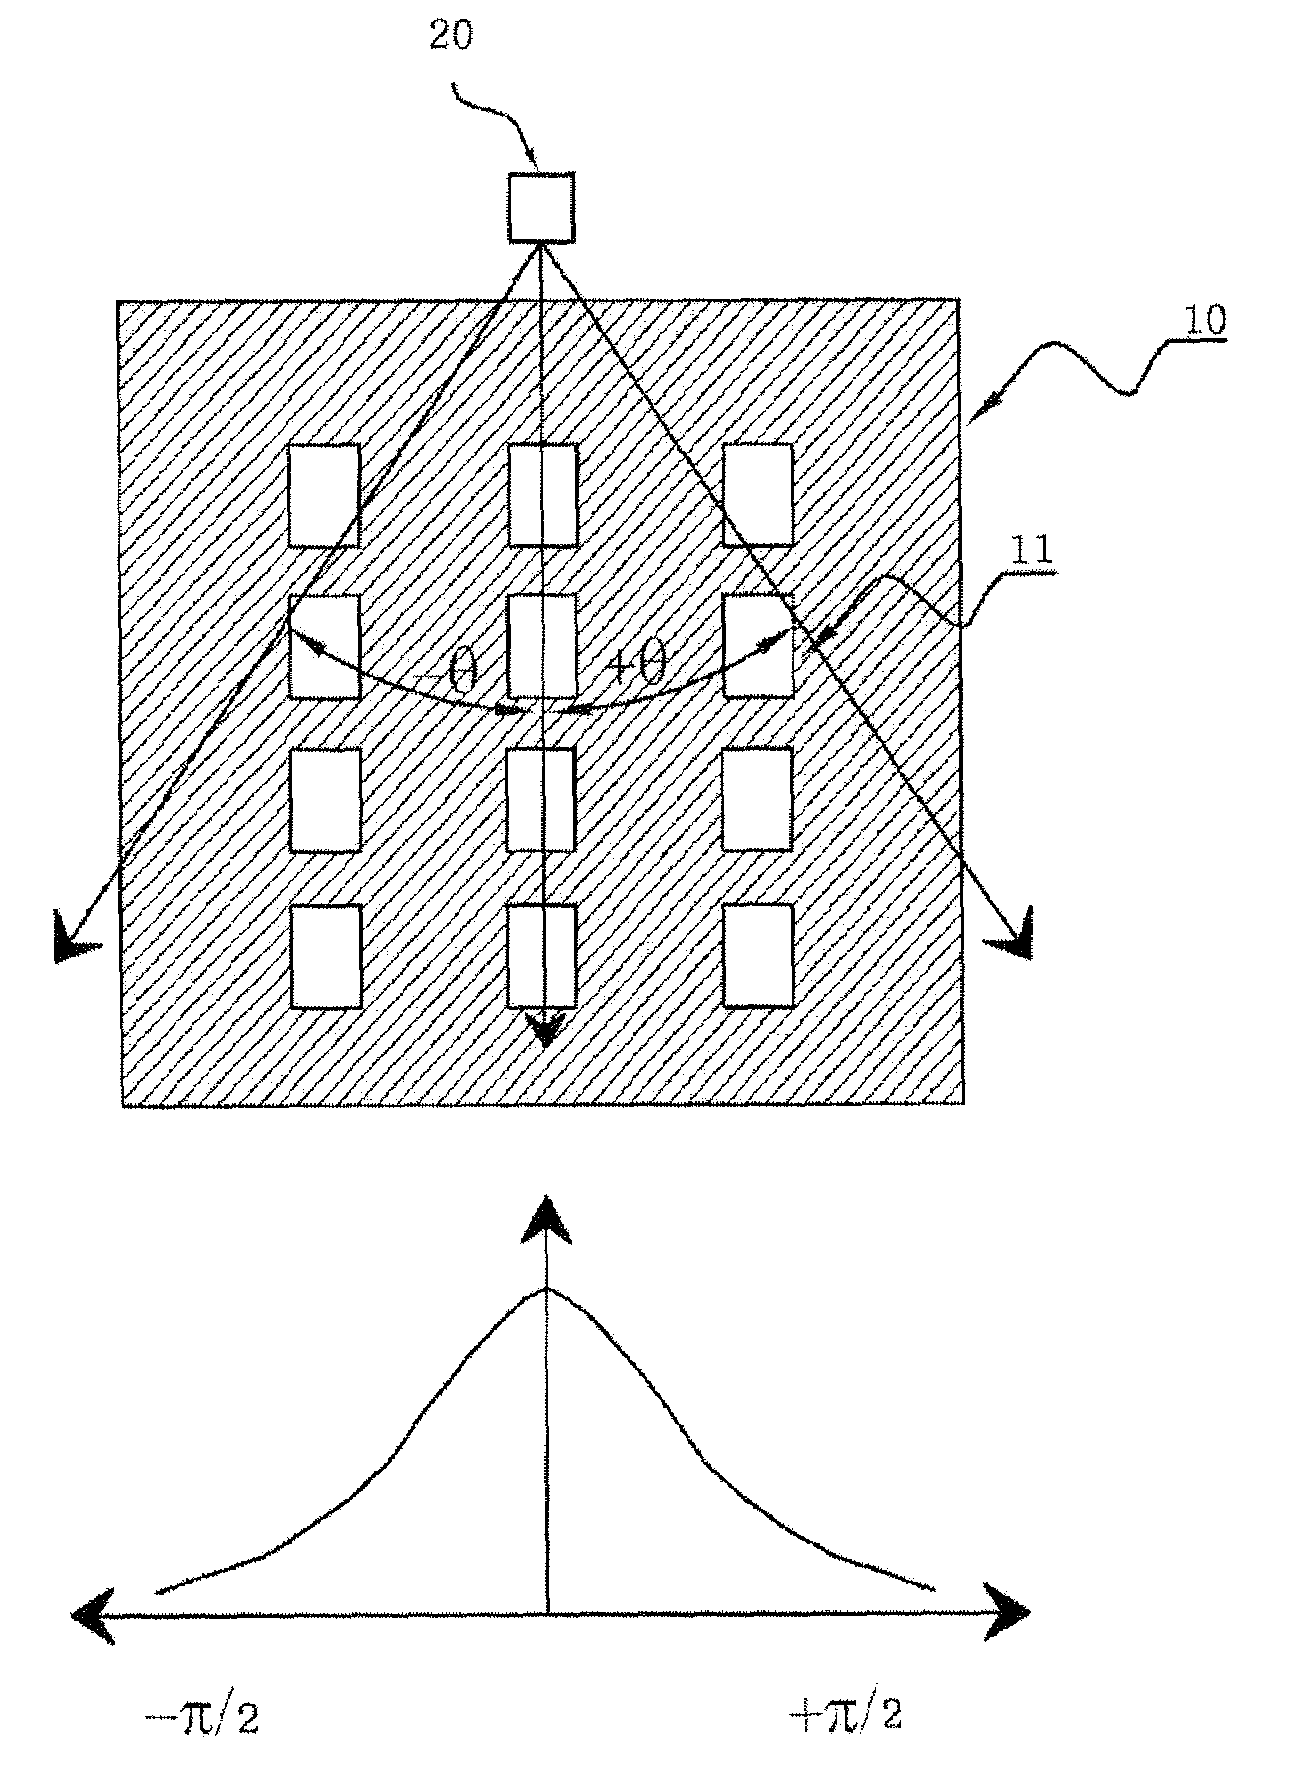 Flexible backlight unit for key of input device